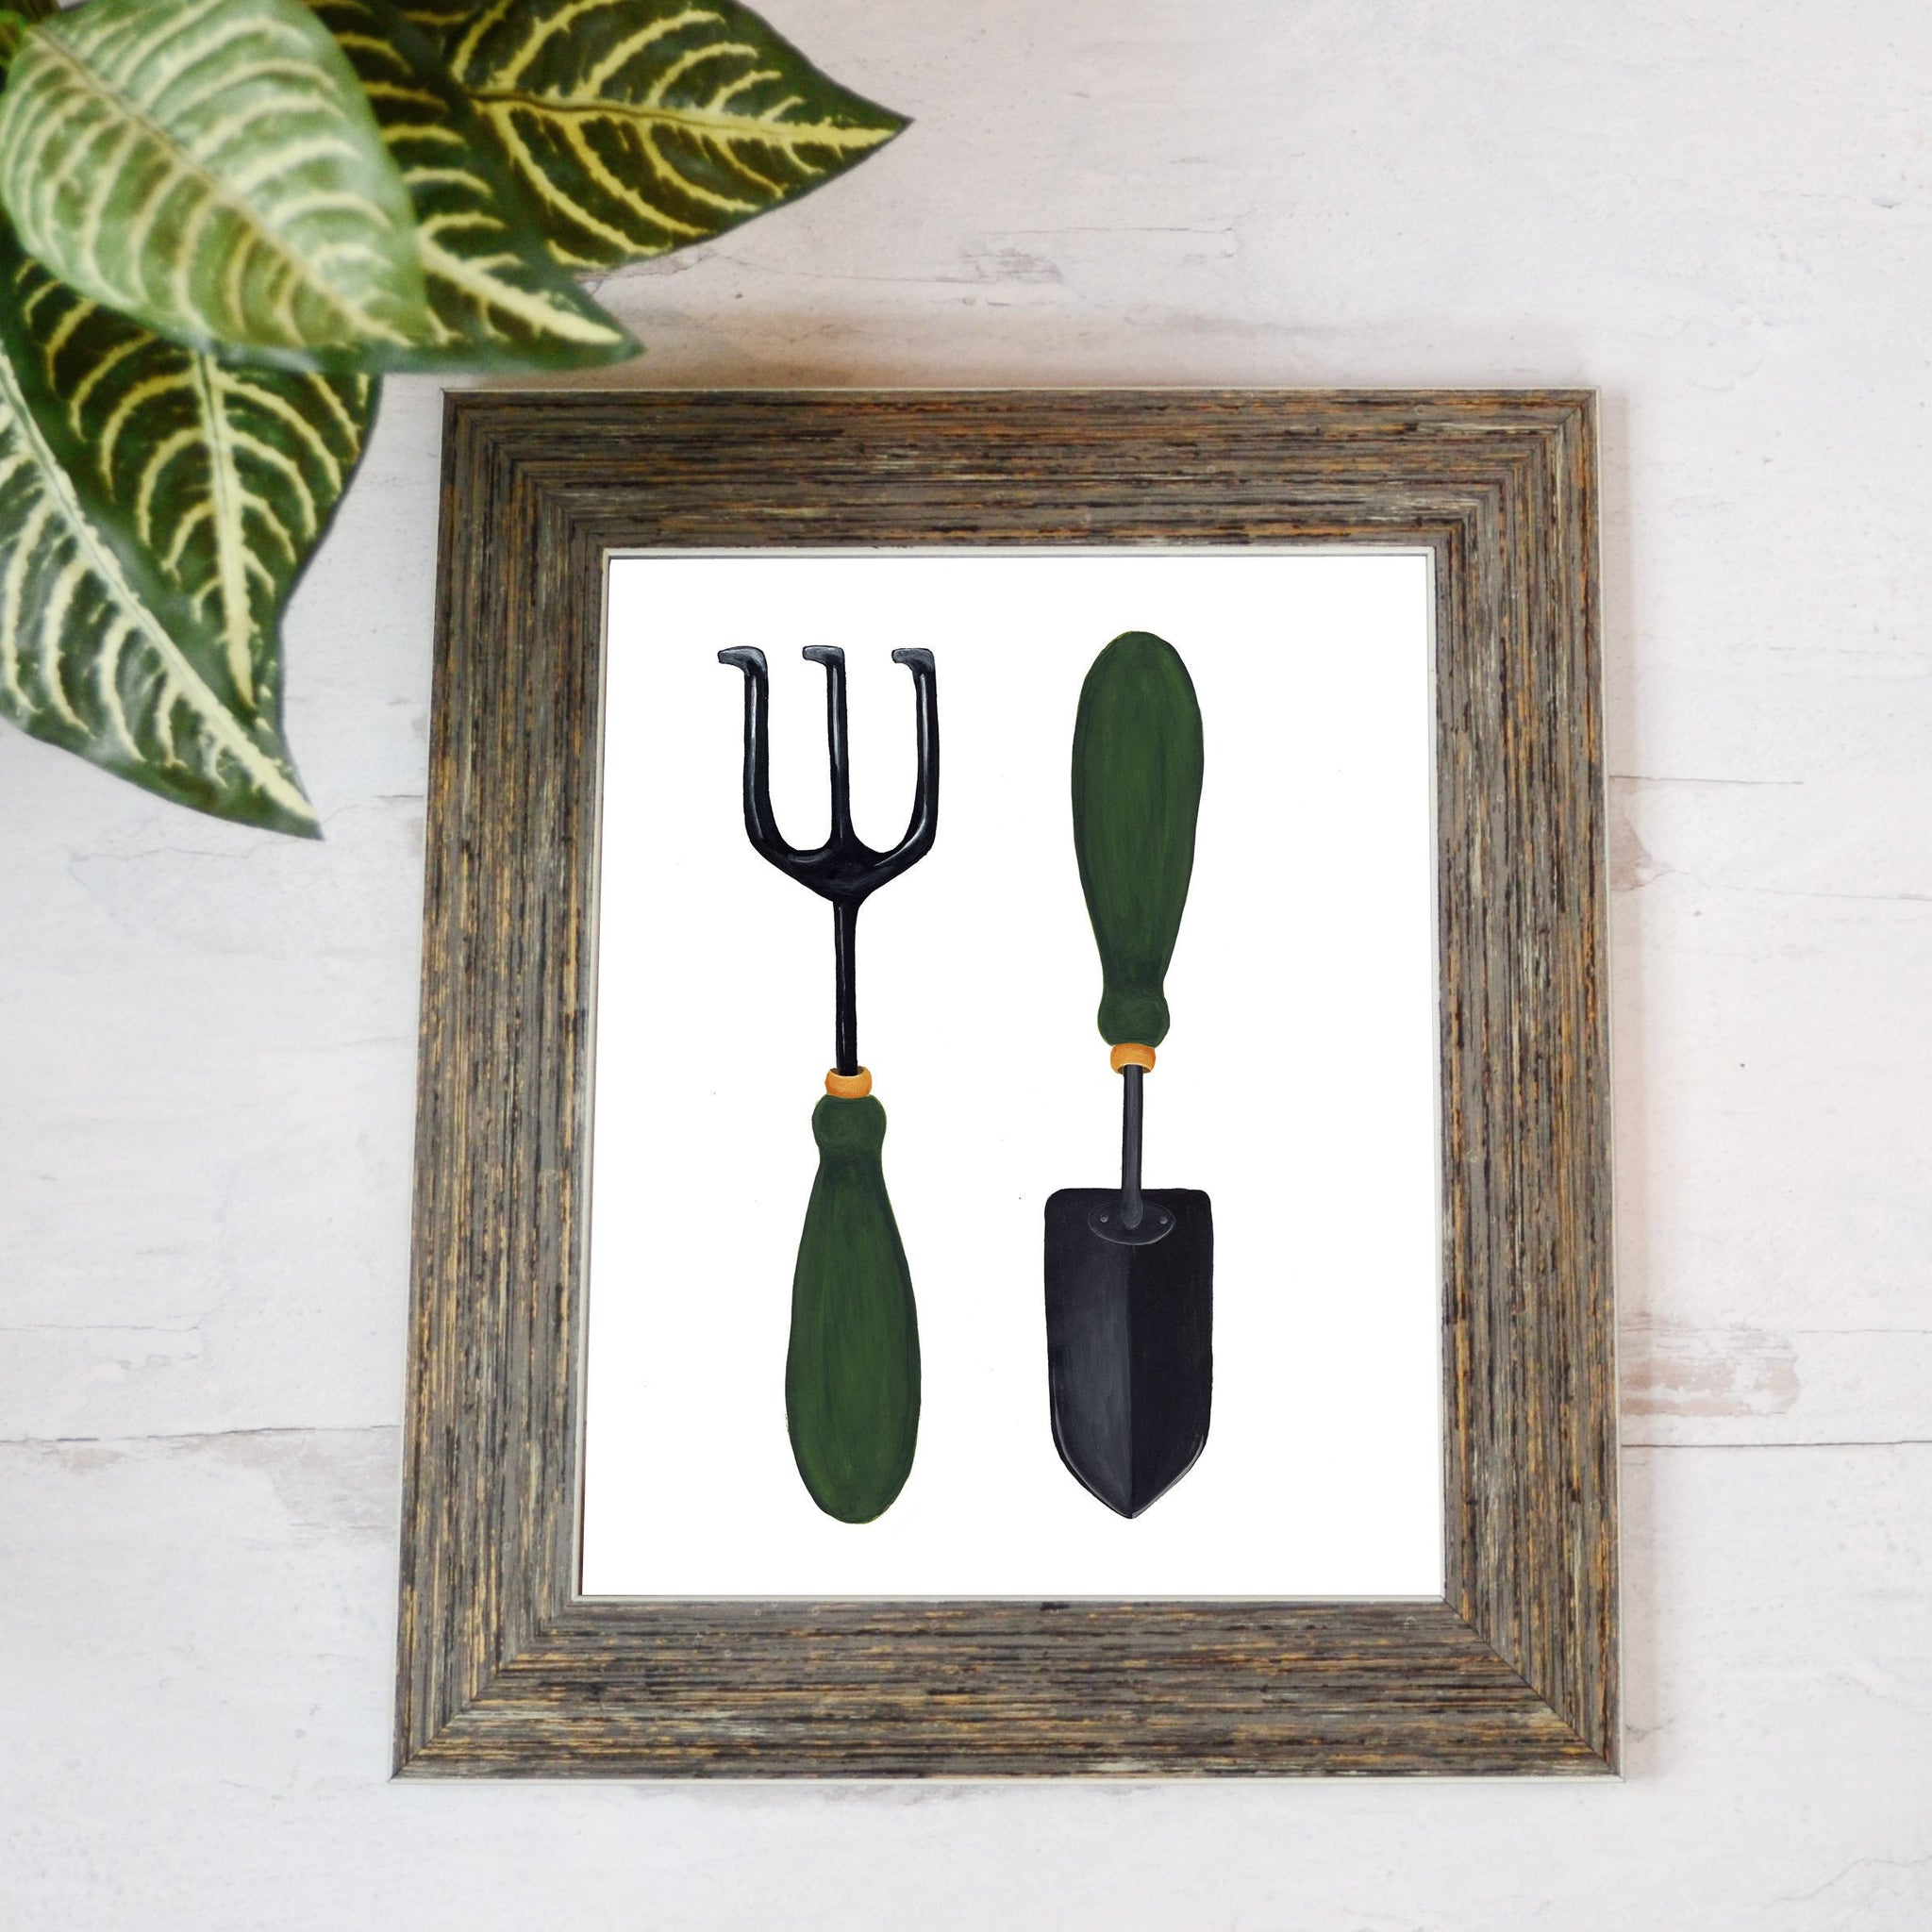 art print of hand painted gardening trowel and rake with green handles